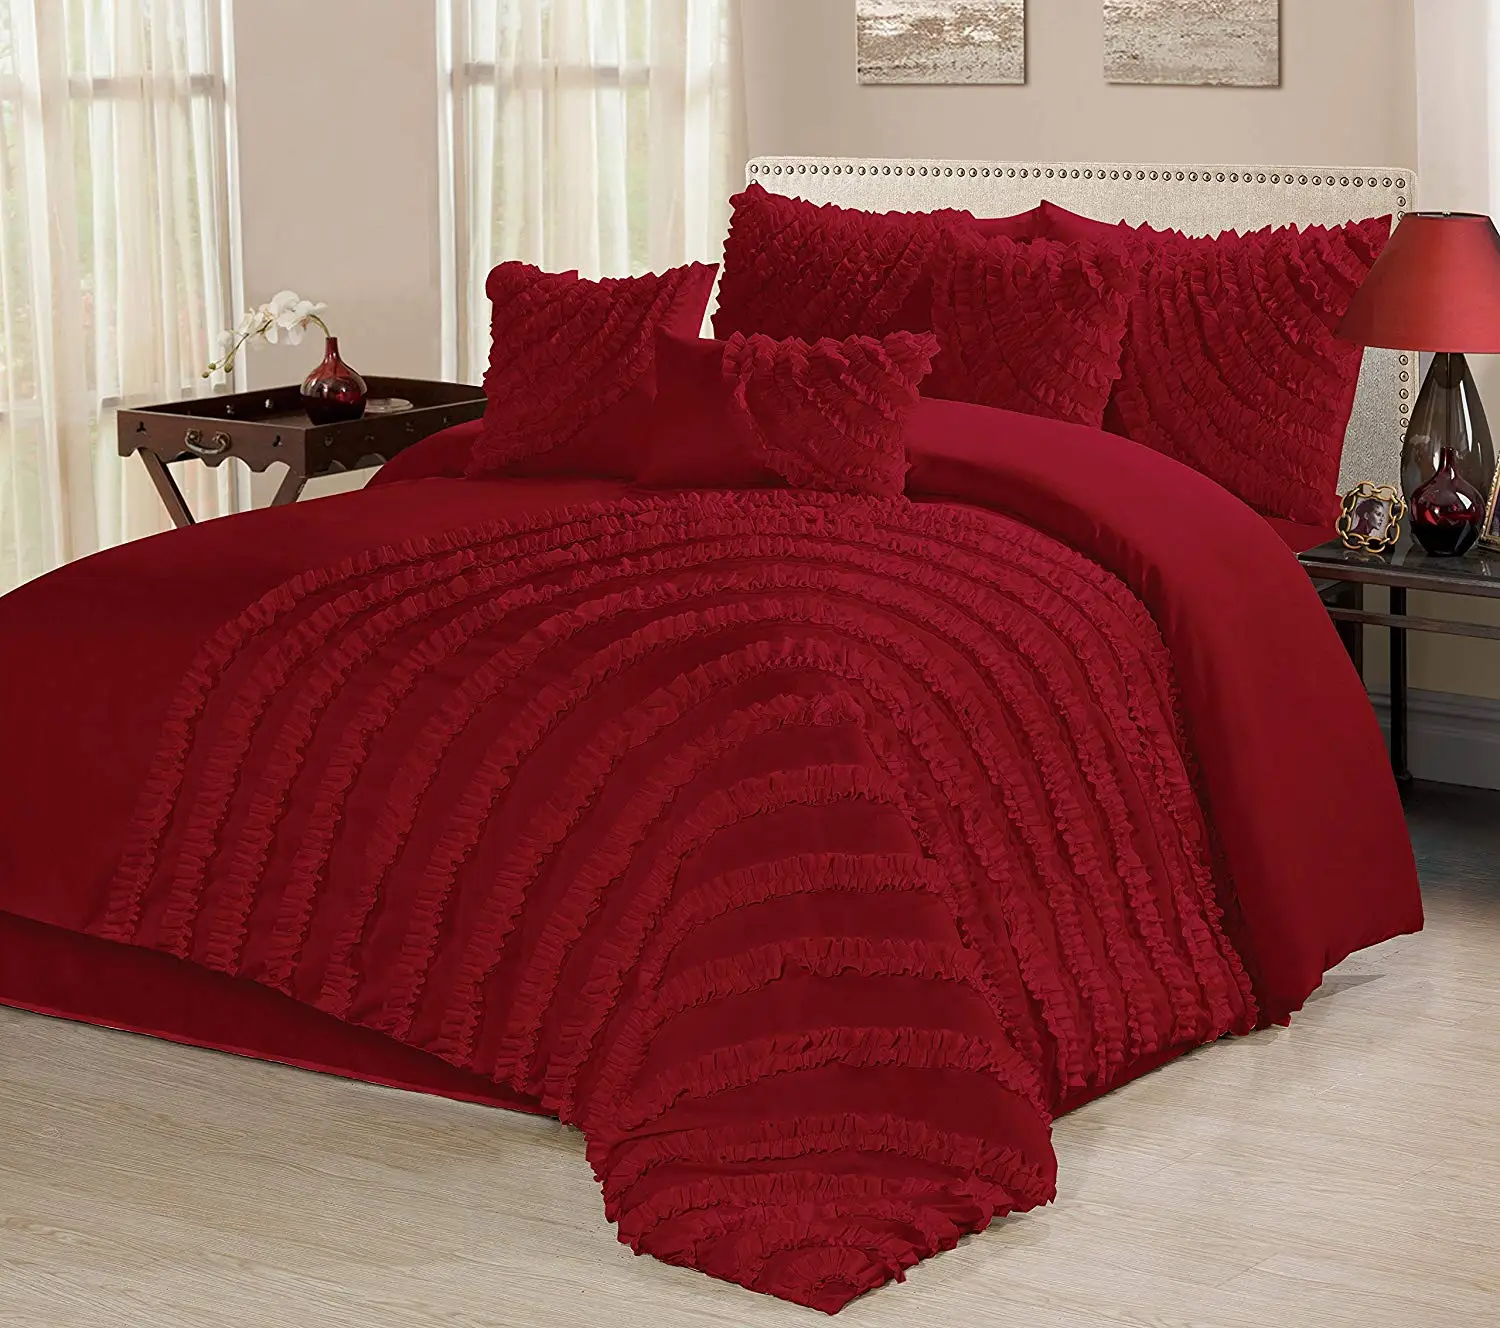 Cheap Red Cal King Comforter Sets, find Red Cal King ...